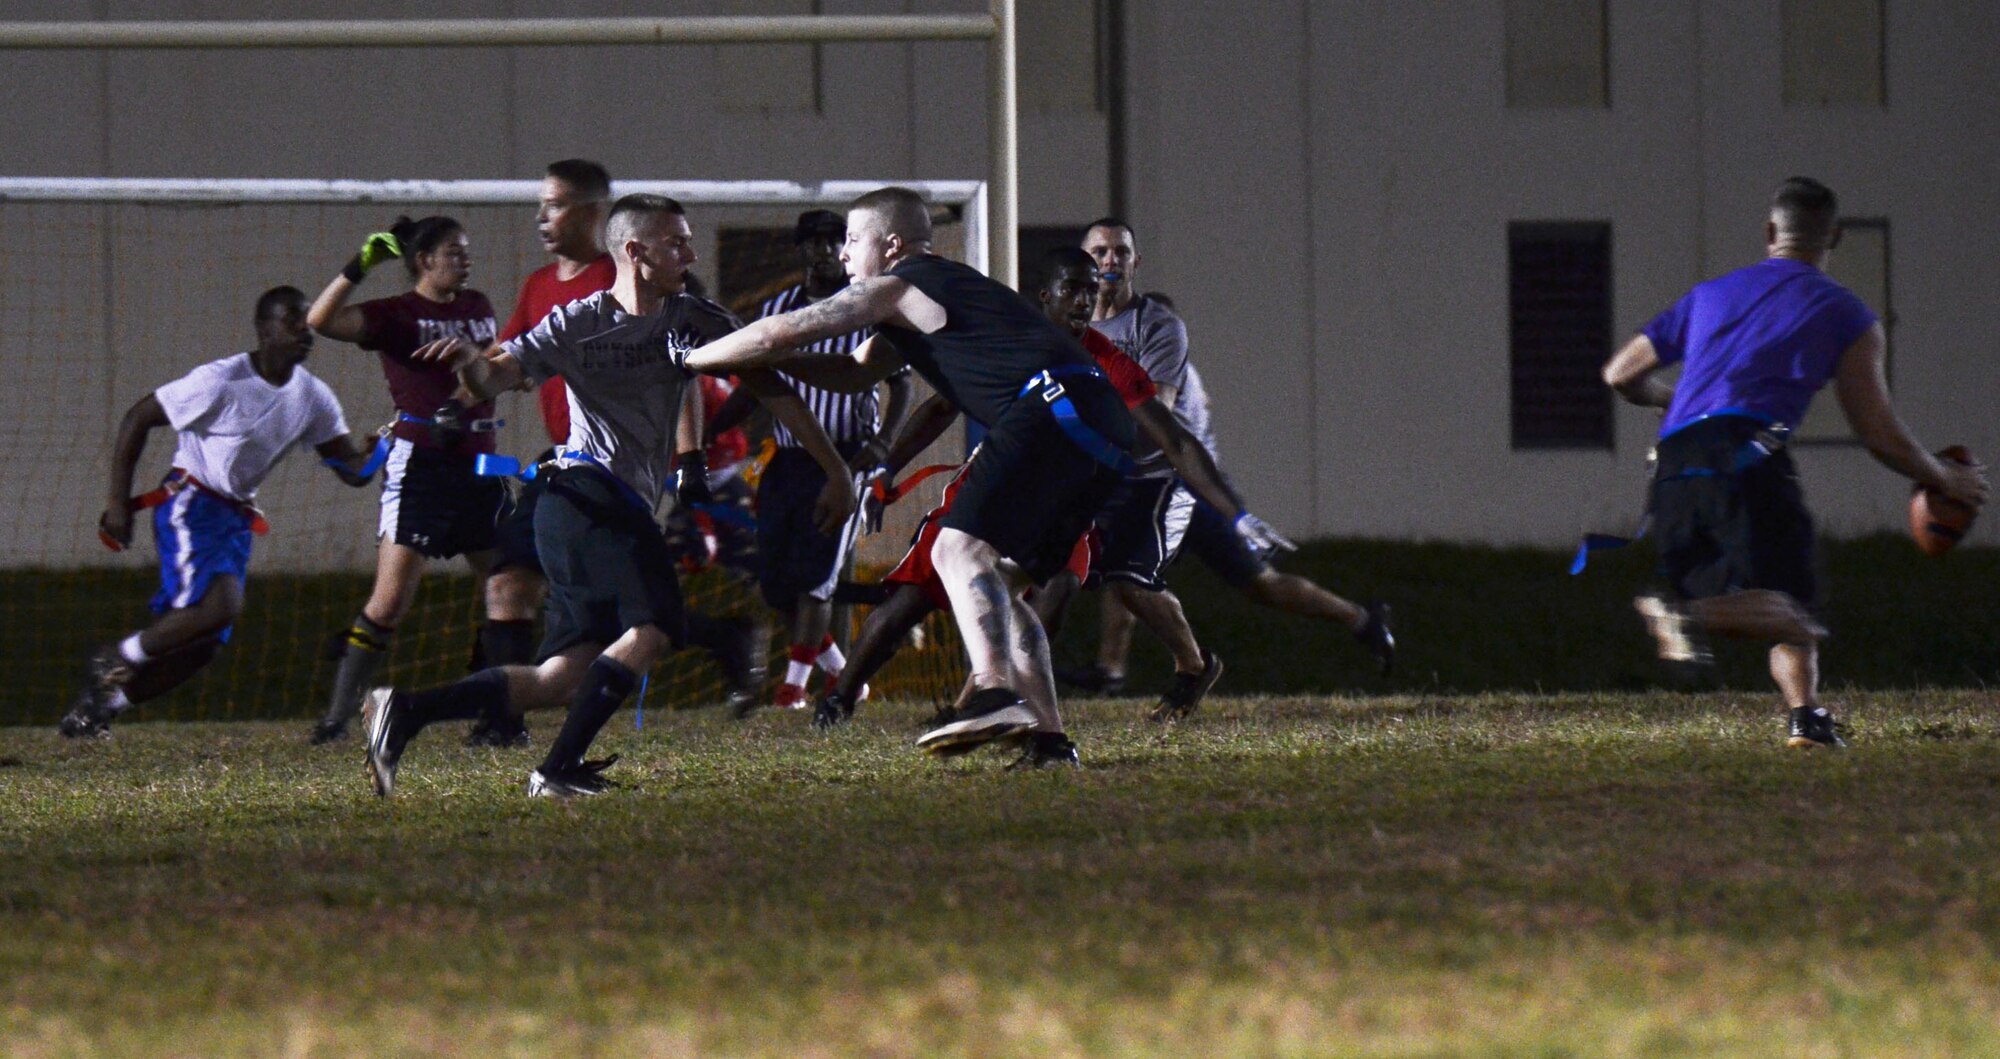 The 36th Logistics Readiness Squadron and 36th Force Support Squadron intramural football teams go head to head on Andersen Air Force Base, Guam, Dec. 19, 2013. 36th FSS was defeated by 36th LRS with a score of 21-0. (U.S. Air Force photo by Airman 1st Class Mariah Haddenham/Released)